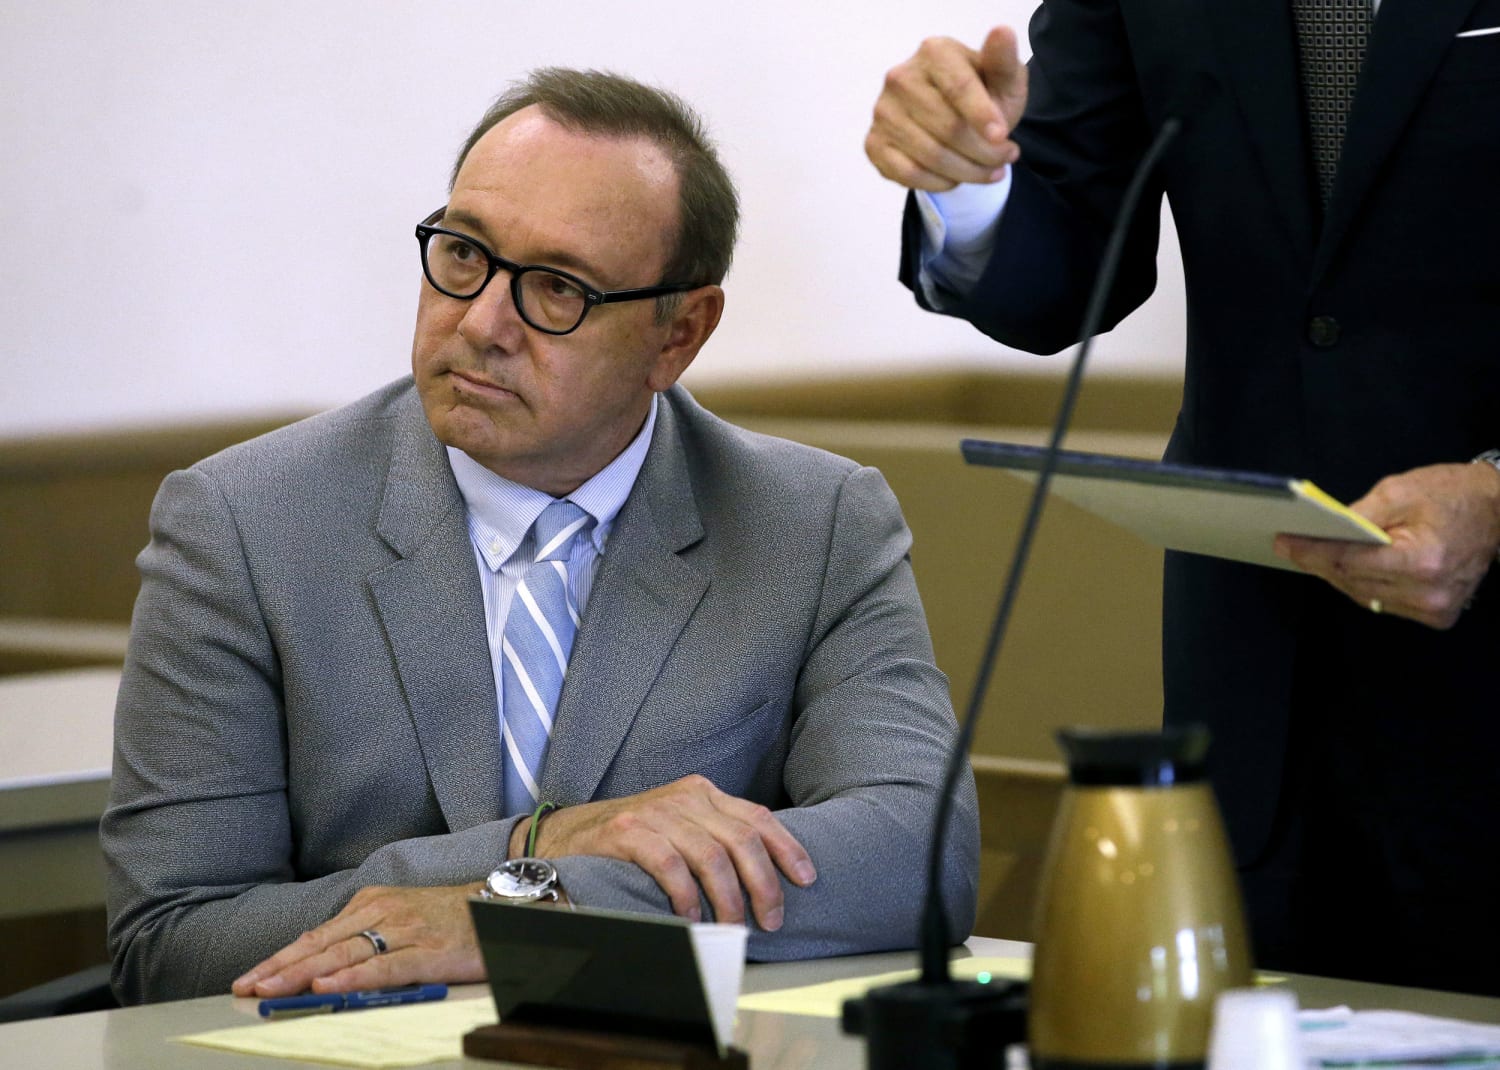 Kevin Spacey must stand trial in federal court in sex abuse civil suit, judge rules